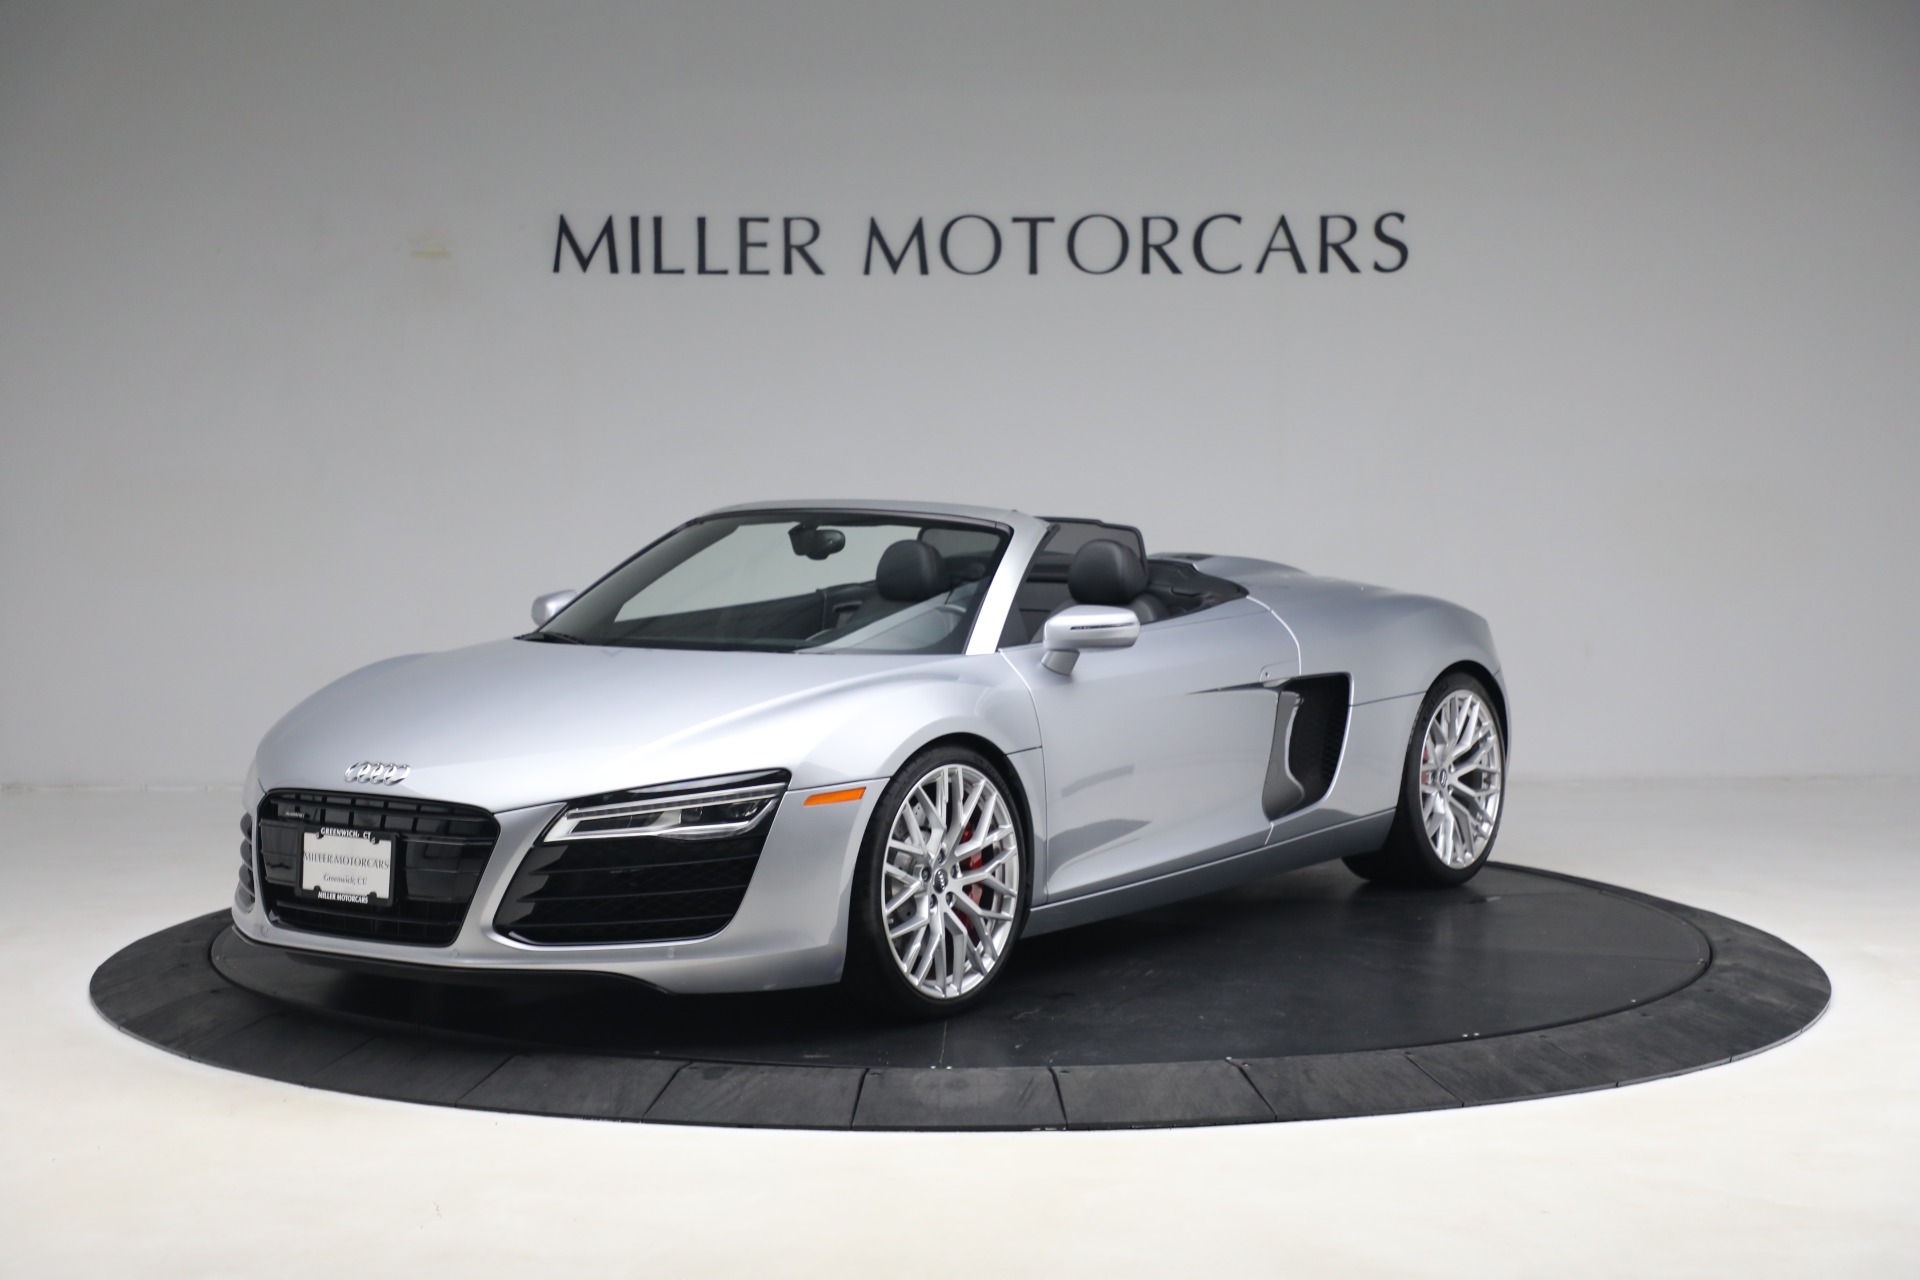 Used 2015 Audi R8 4.2 quattro Spyder for sale $149,900 at Alfa Romeo of Greenwich in Greenwich CT 06830 1